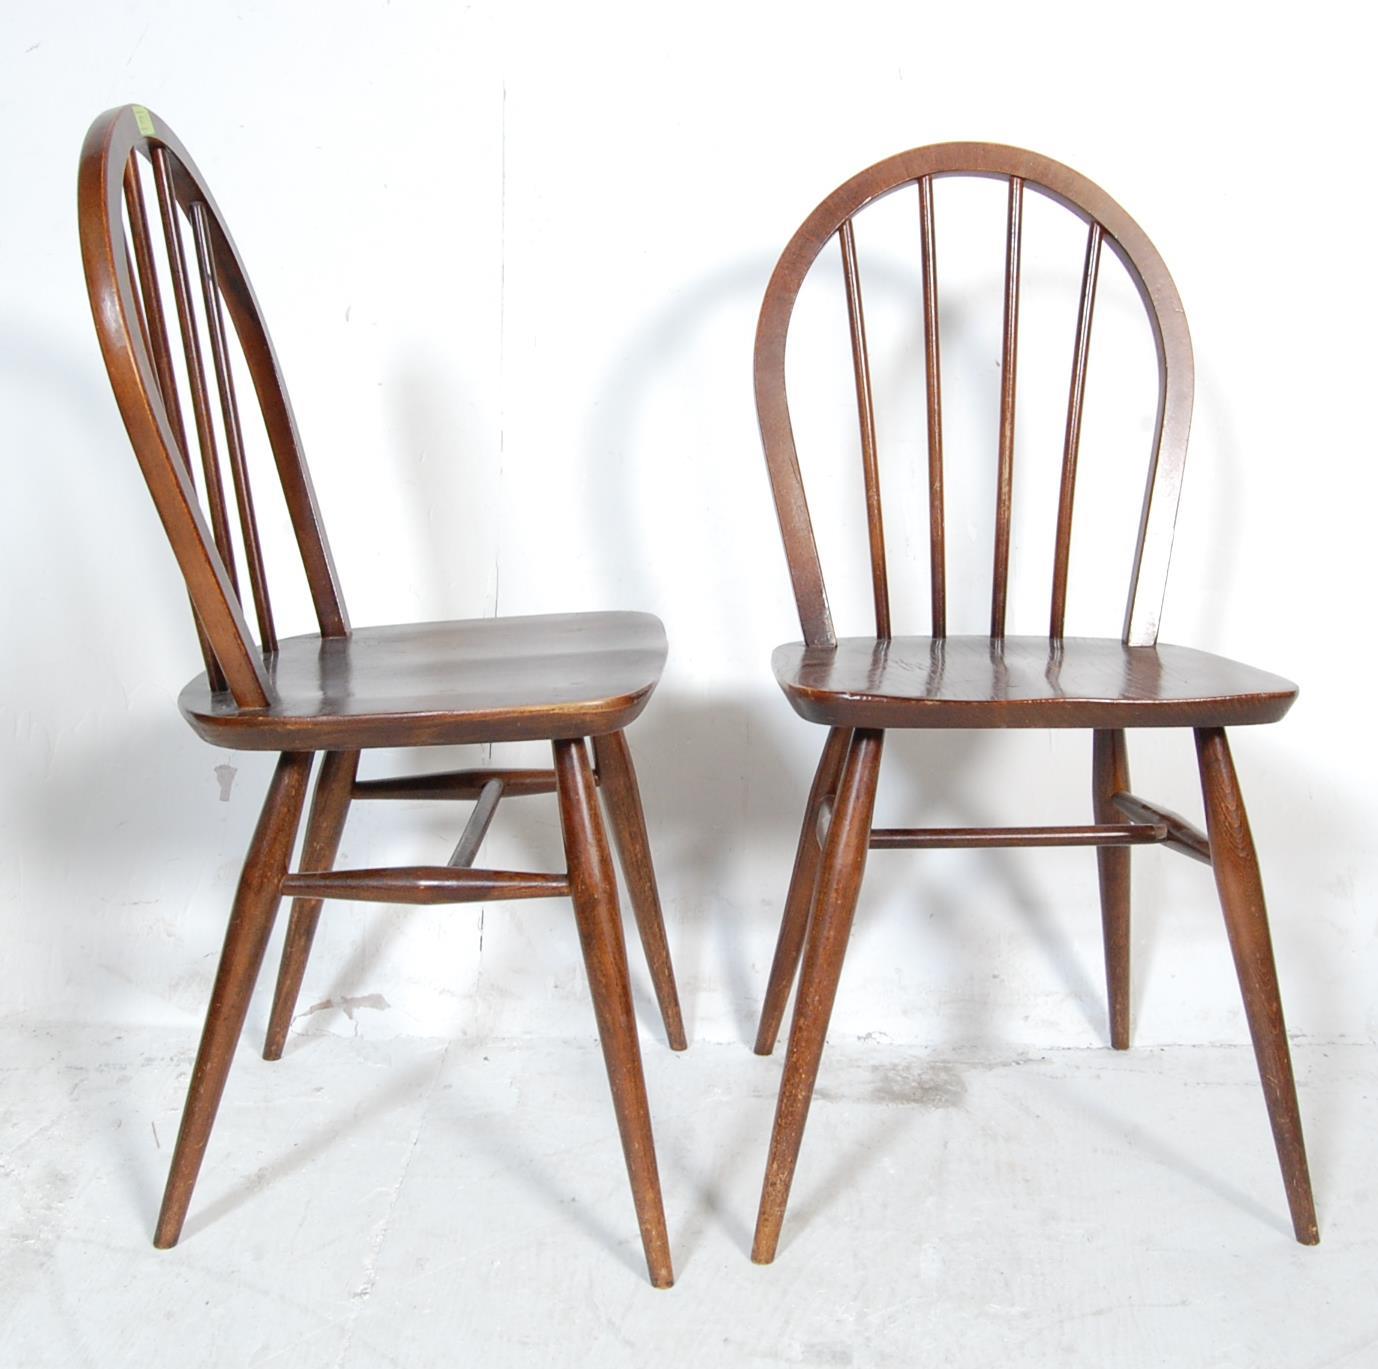 TWO 1950’S BEECH AND ELM DINING CHAIRS - Image 5 of 7